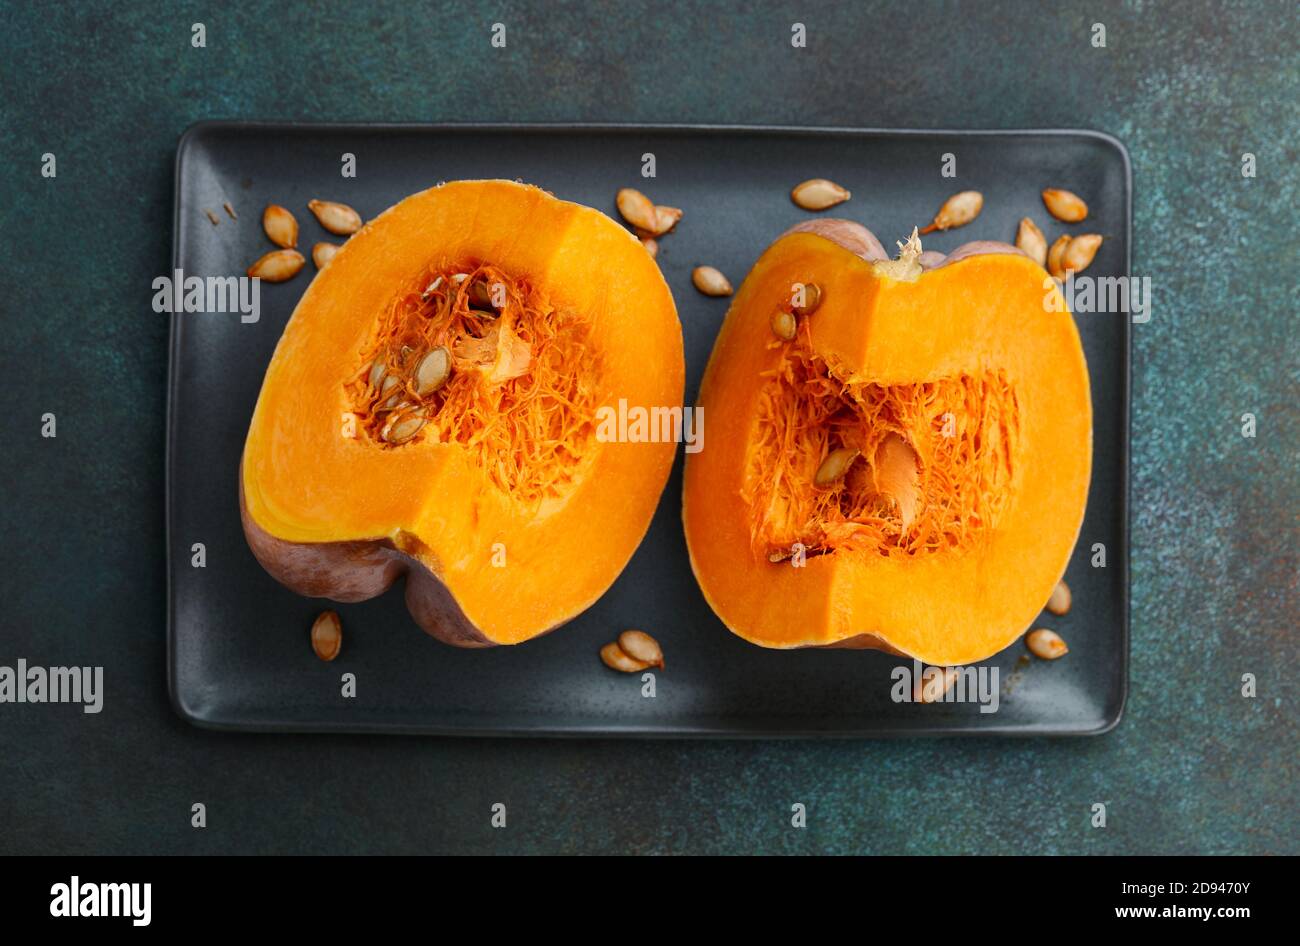 Pumpkin slices in plate on textured green background. Seasonal food. Stock Photo